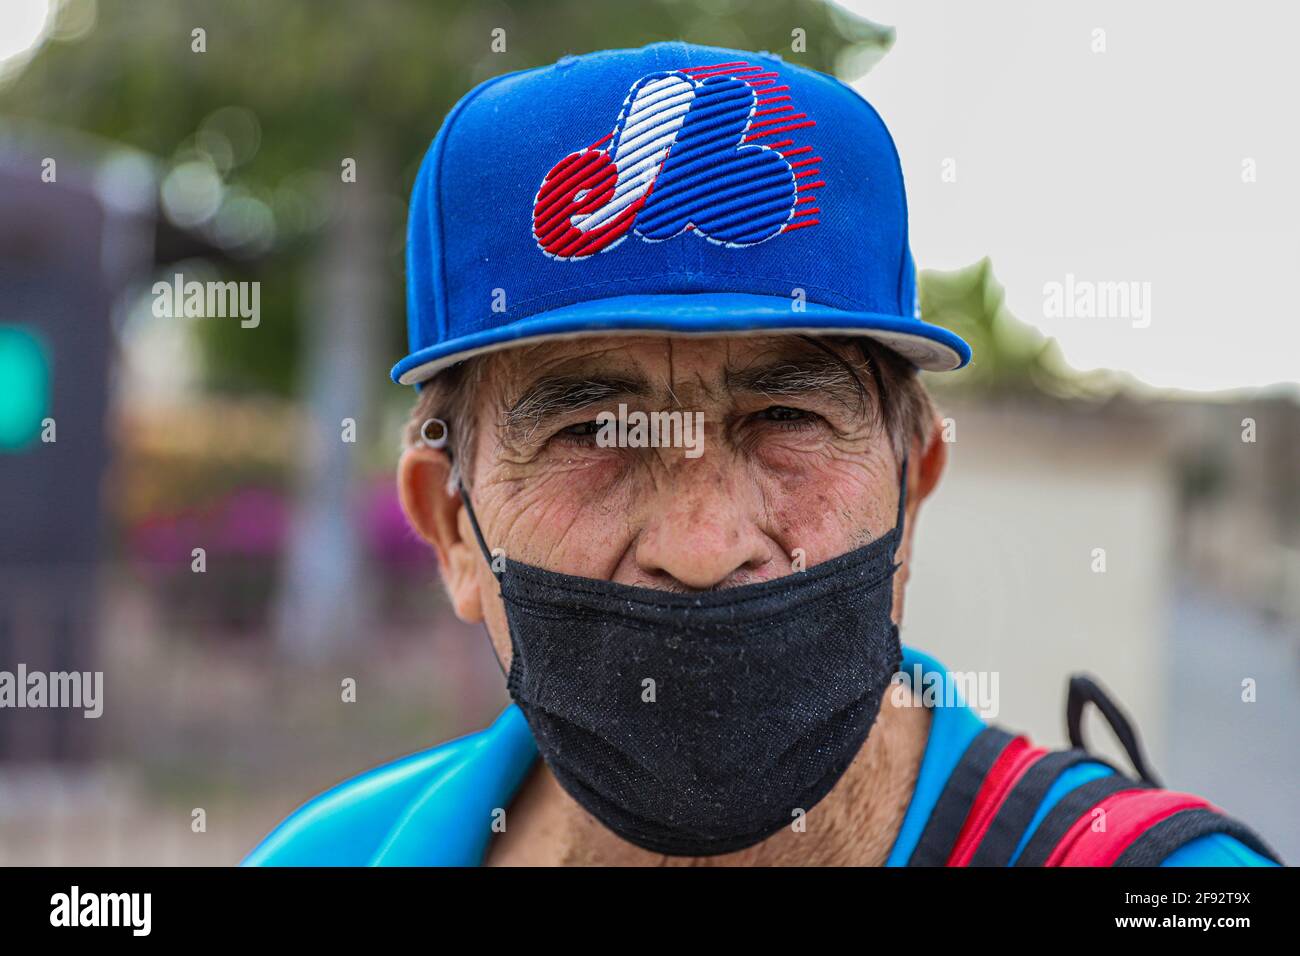 An older man wears a mask for Covid 19 and a blue cap from the defunct or  defunct Major League Baseball team, MLB, the Montreal Expos on April 15,  2021 in Hermosillo